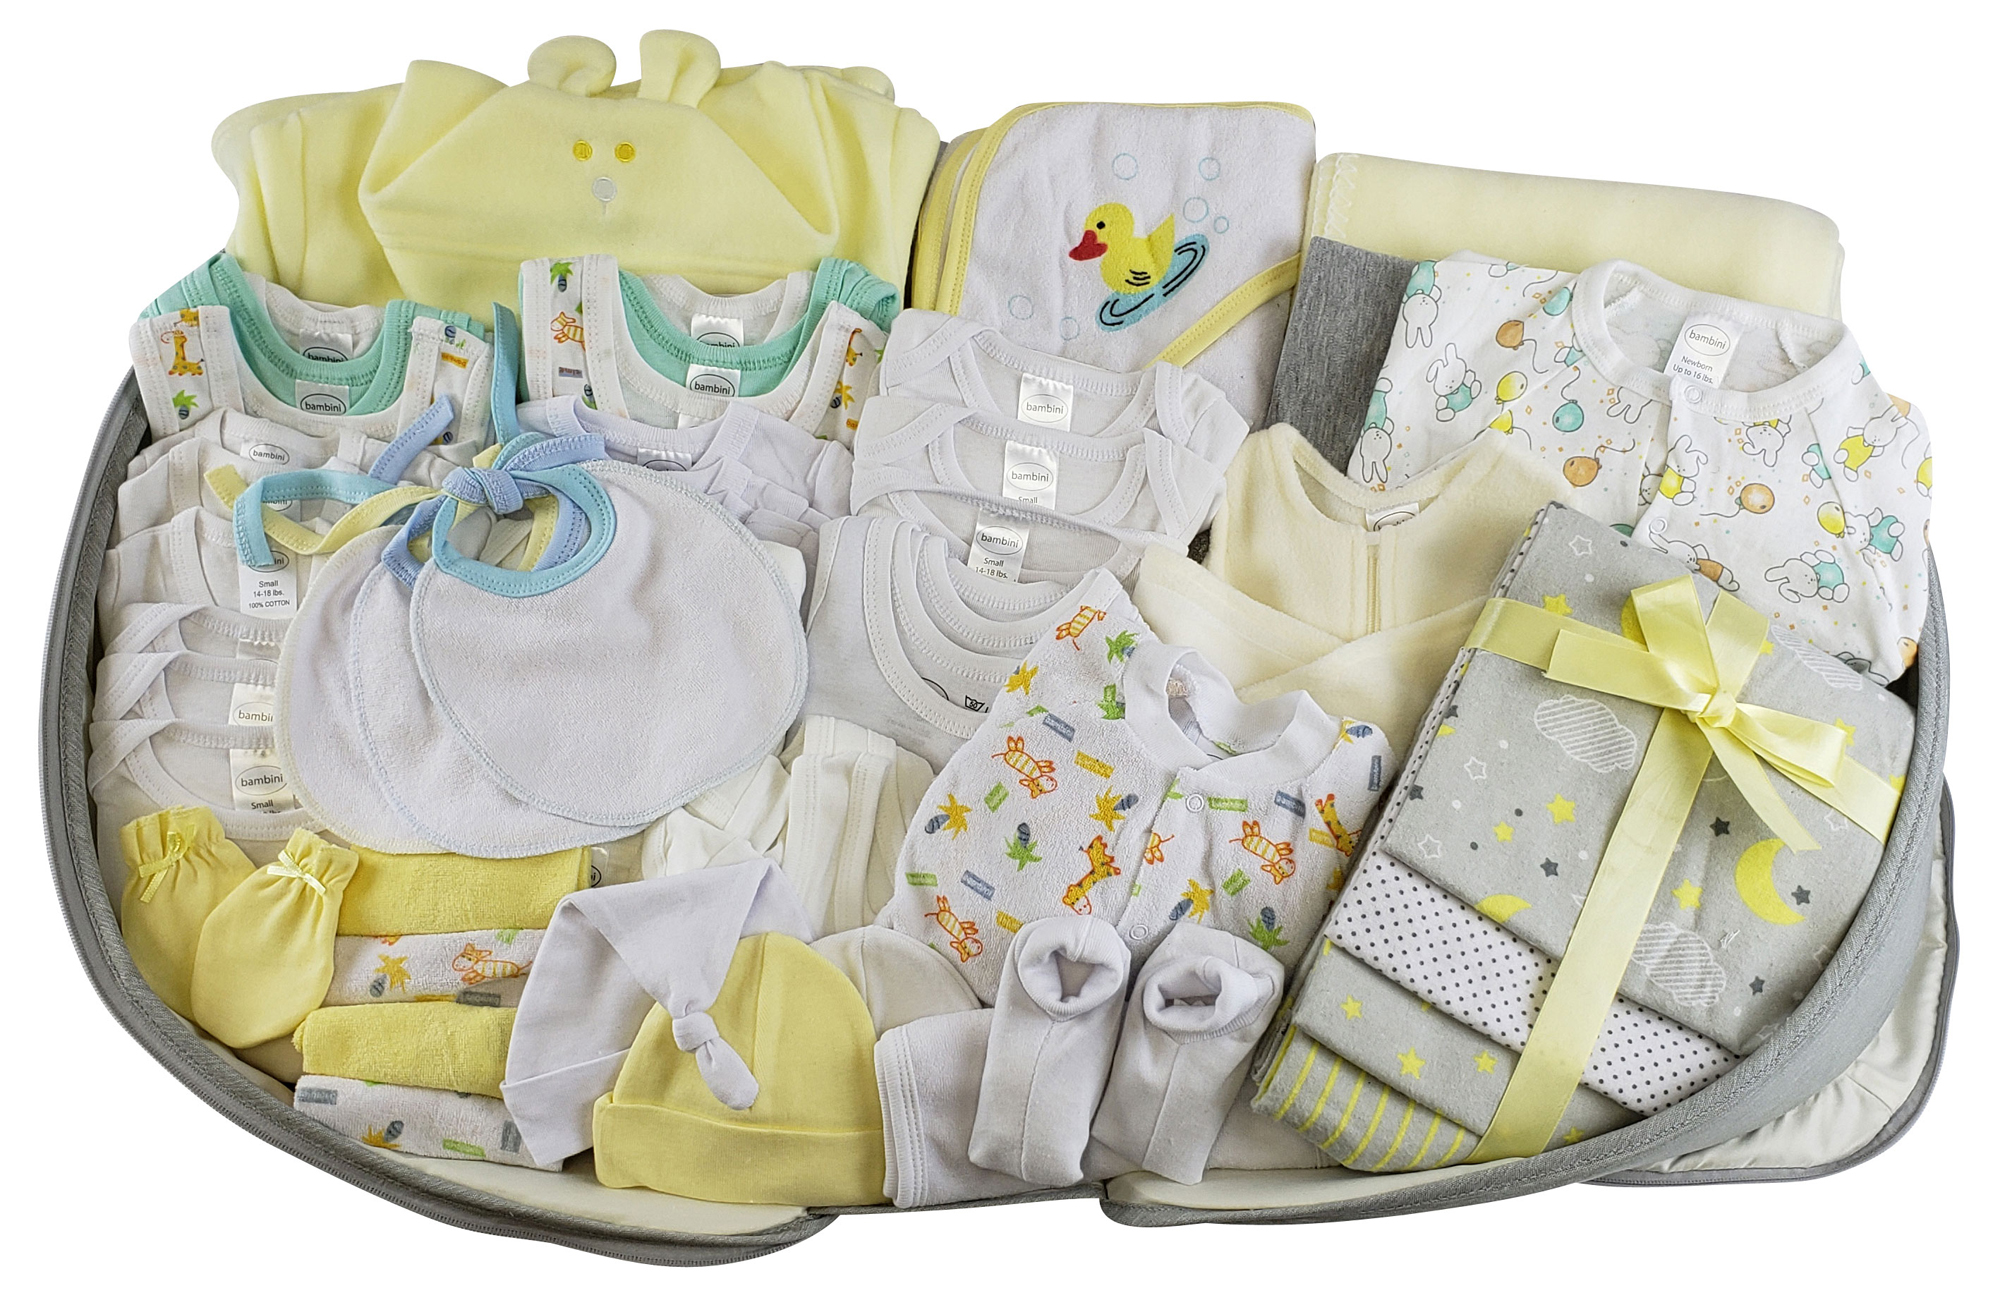 62 pc Unisex Baby Clothing Starter Set with All-in-one Portable Bassinet Foldable Baby Bed, Travel Crib Infant and Diaper Bag Changing Station - image 1 of 2